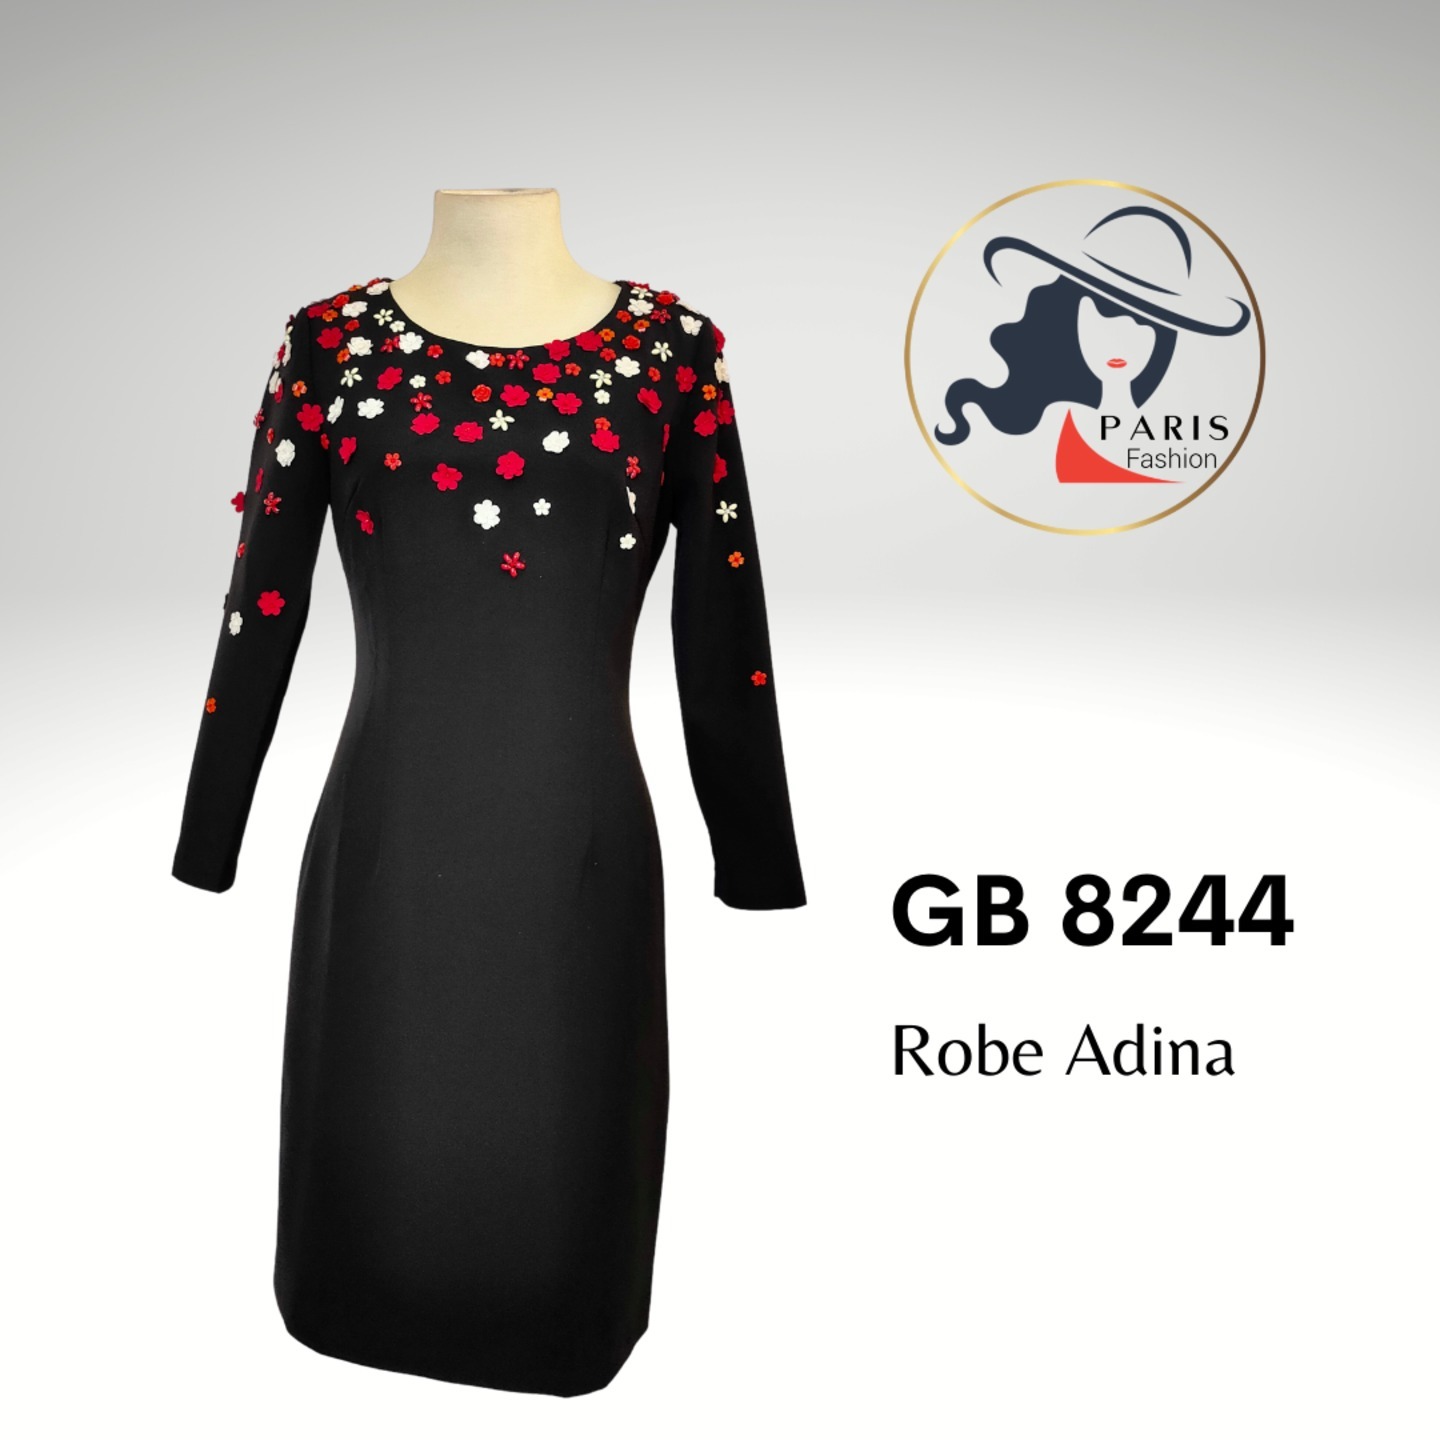 GB 8244 ROBE ADINA LONG SLEEVES DRESS WITH HANDSEWN FLORAL APPLIQUE